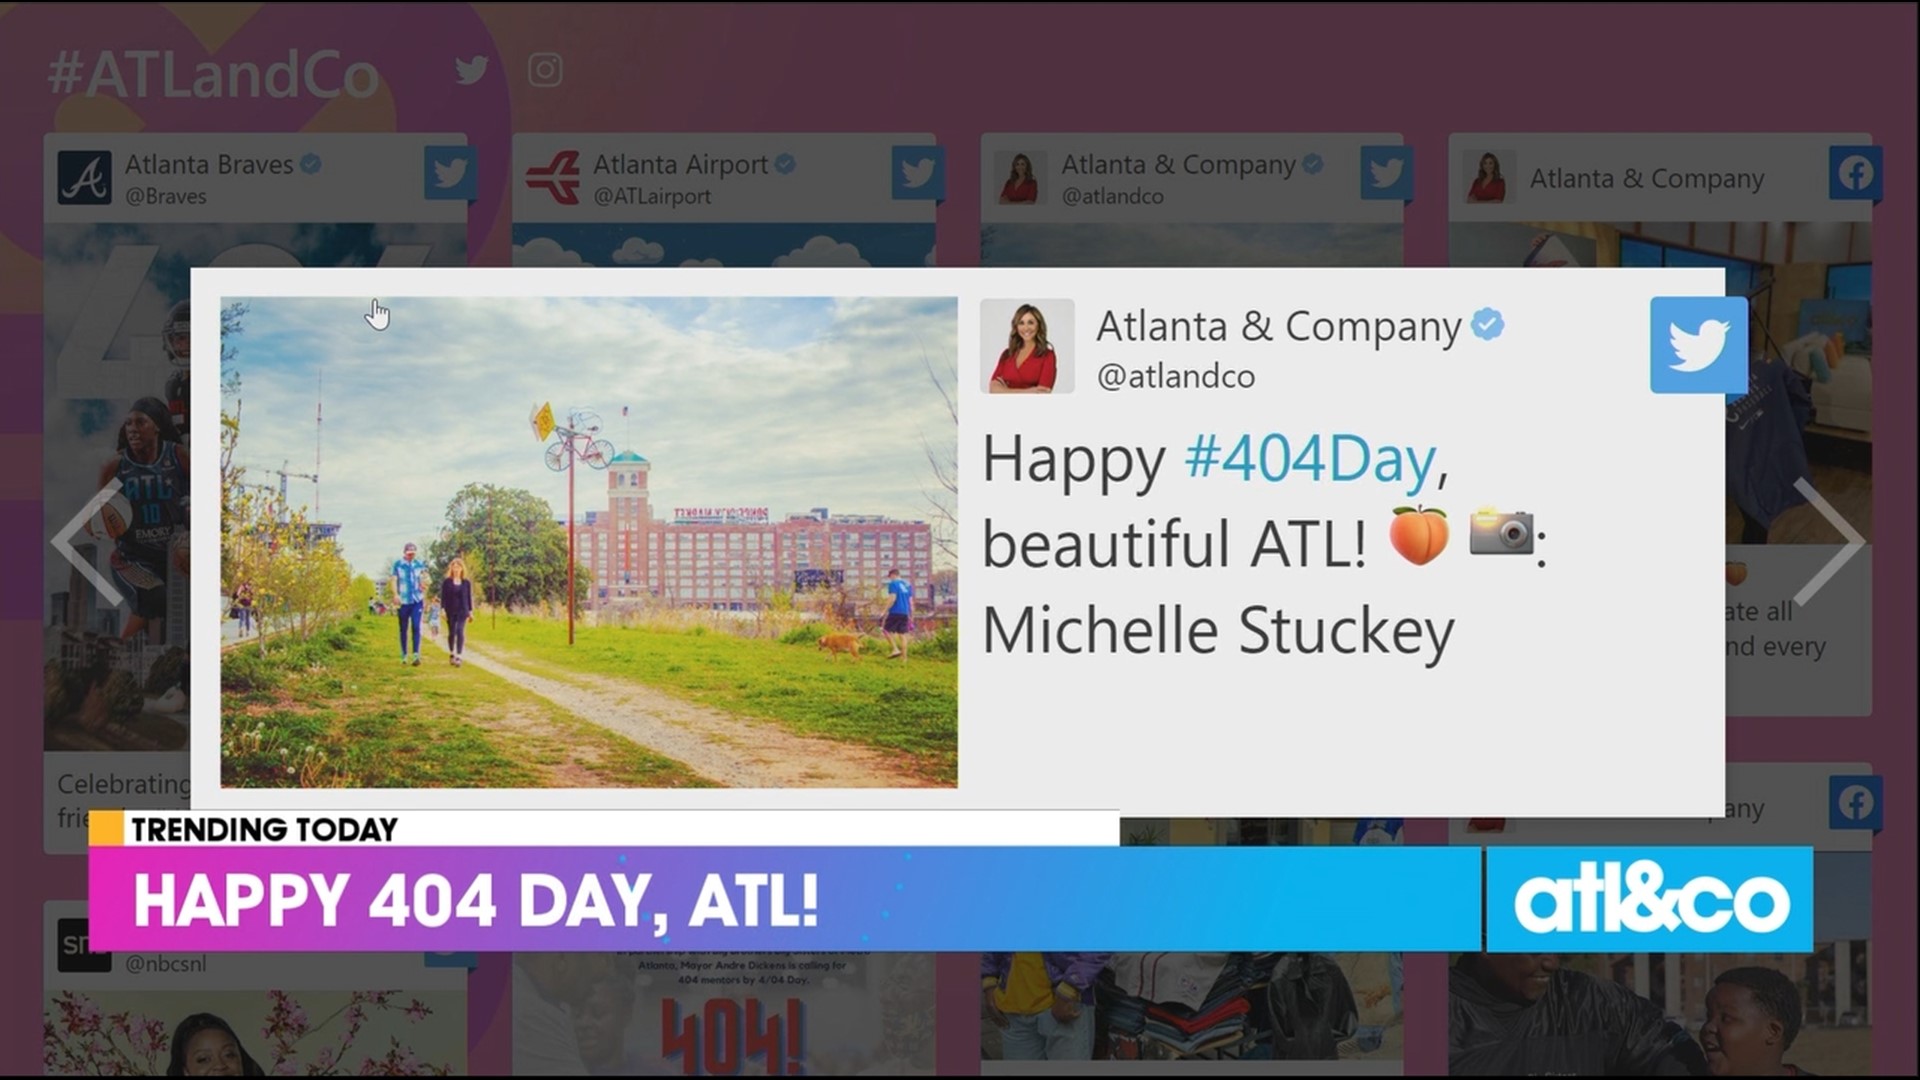 Let's celebrate the unique culture, fierce sports teams, and all that is good and great about Atlanta on this 404 Day.